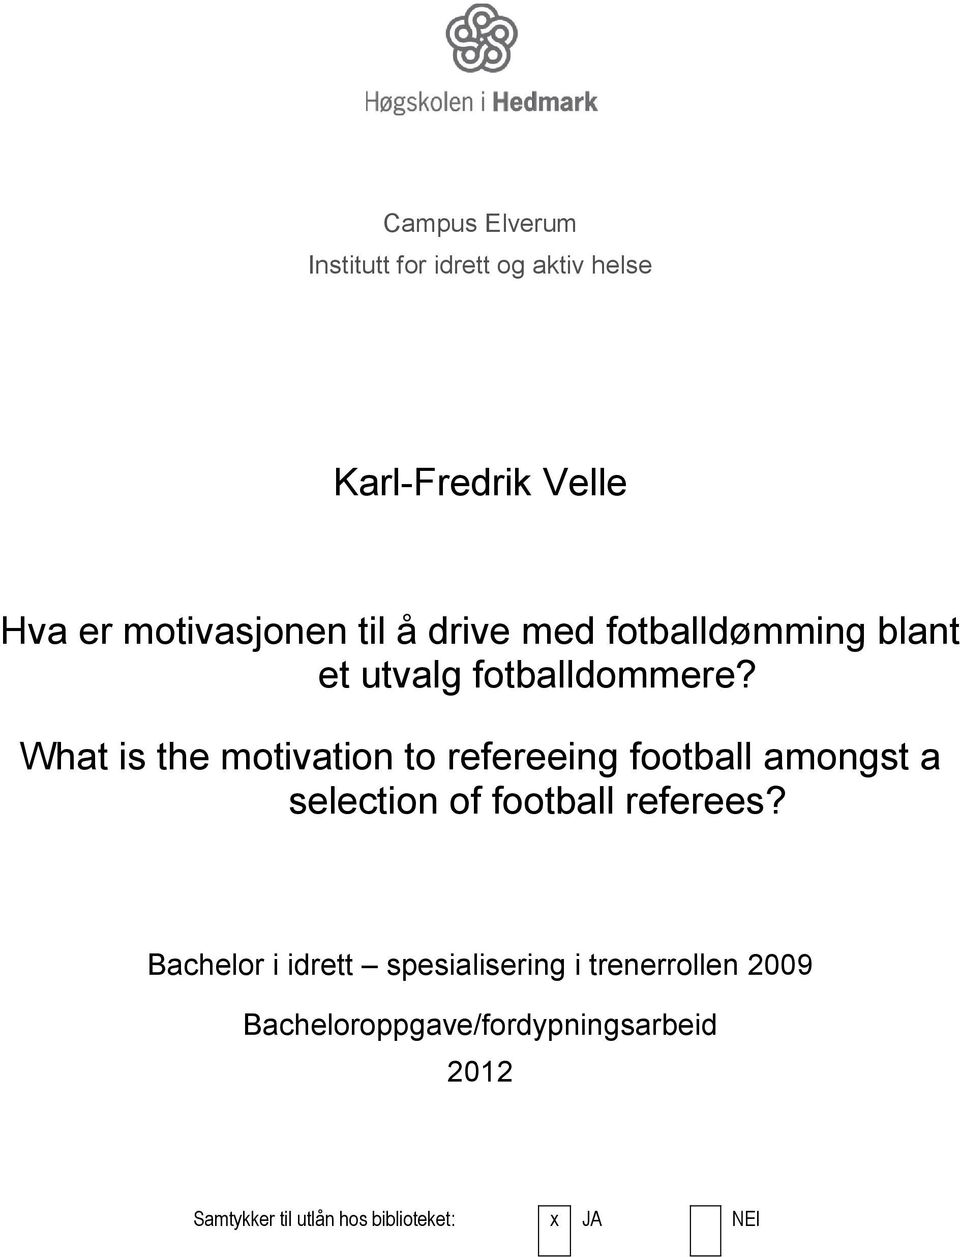 What is the motivation to refereeing football amongst a selection of football referees?